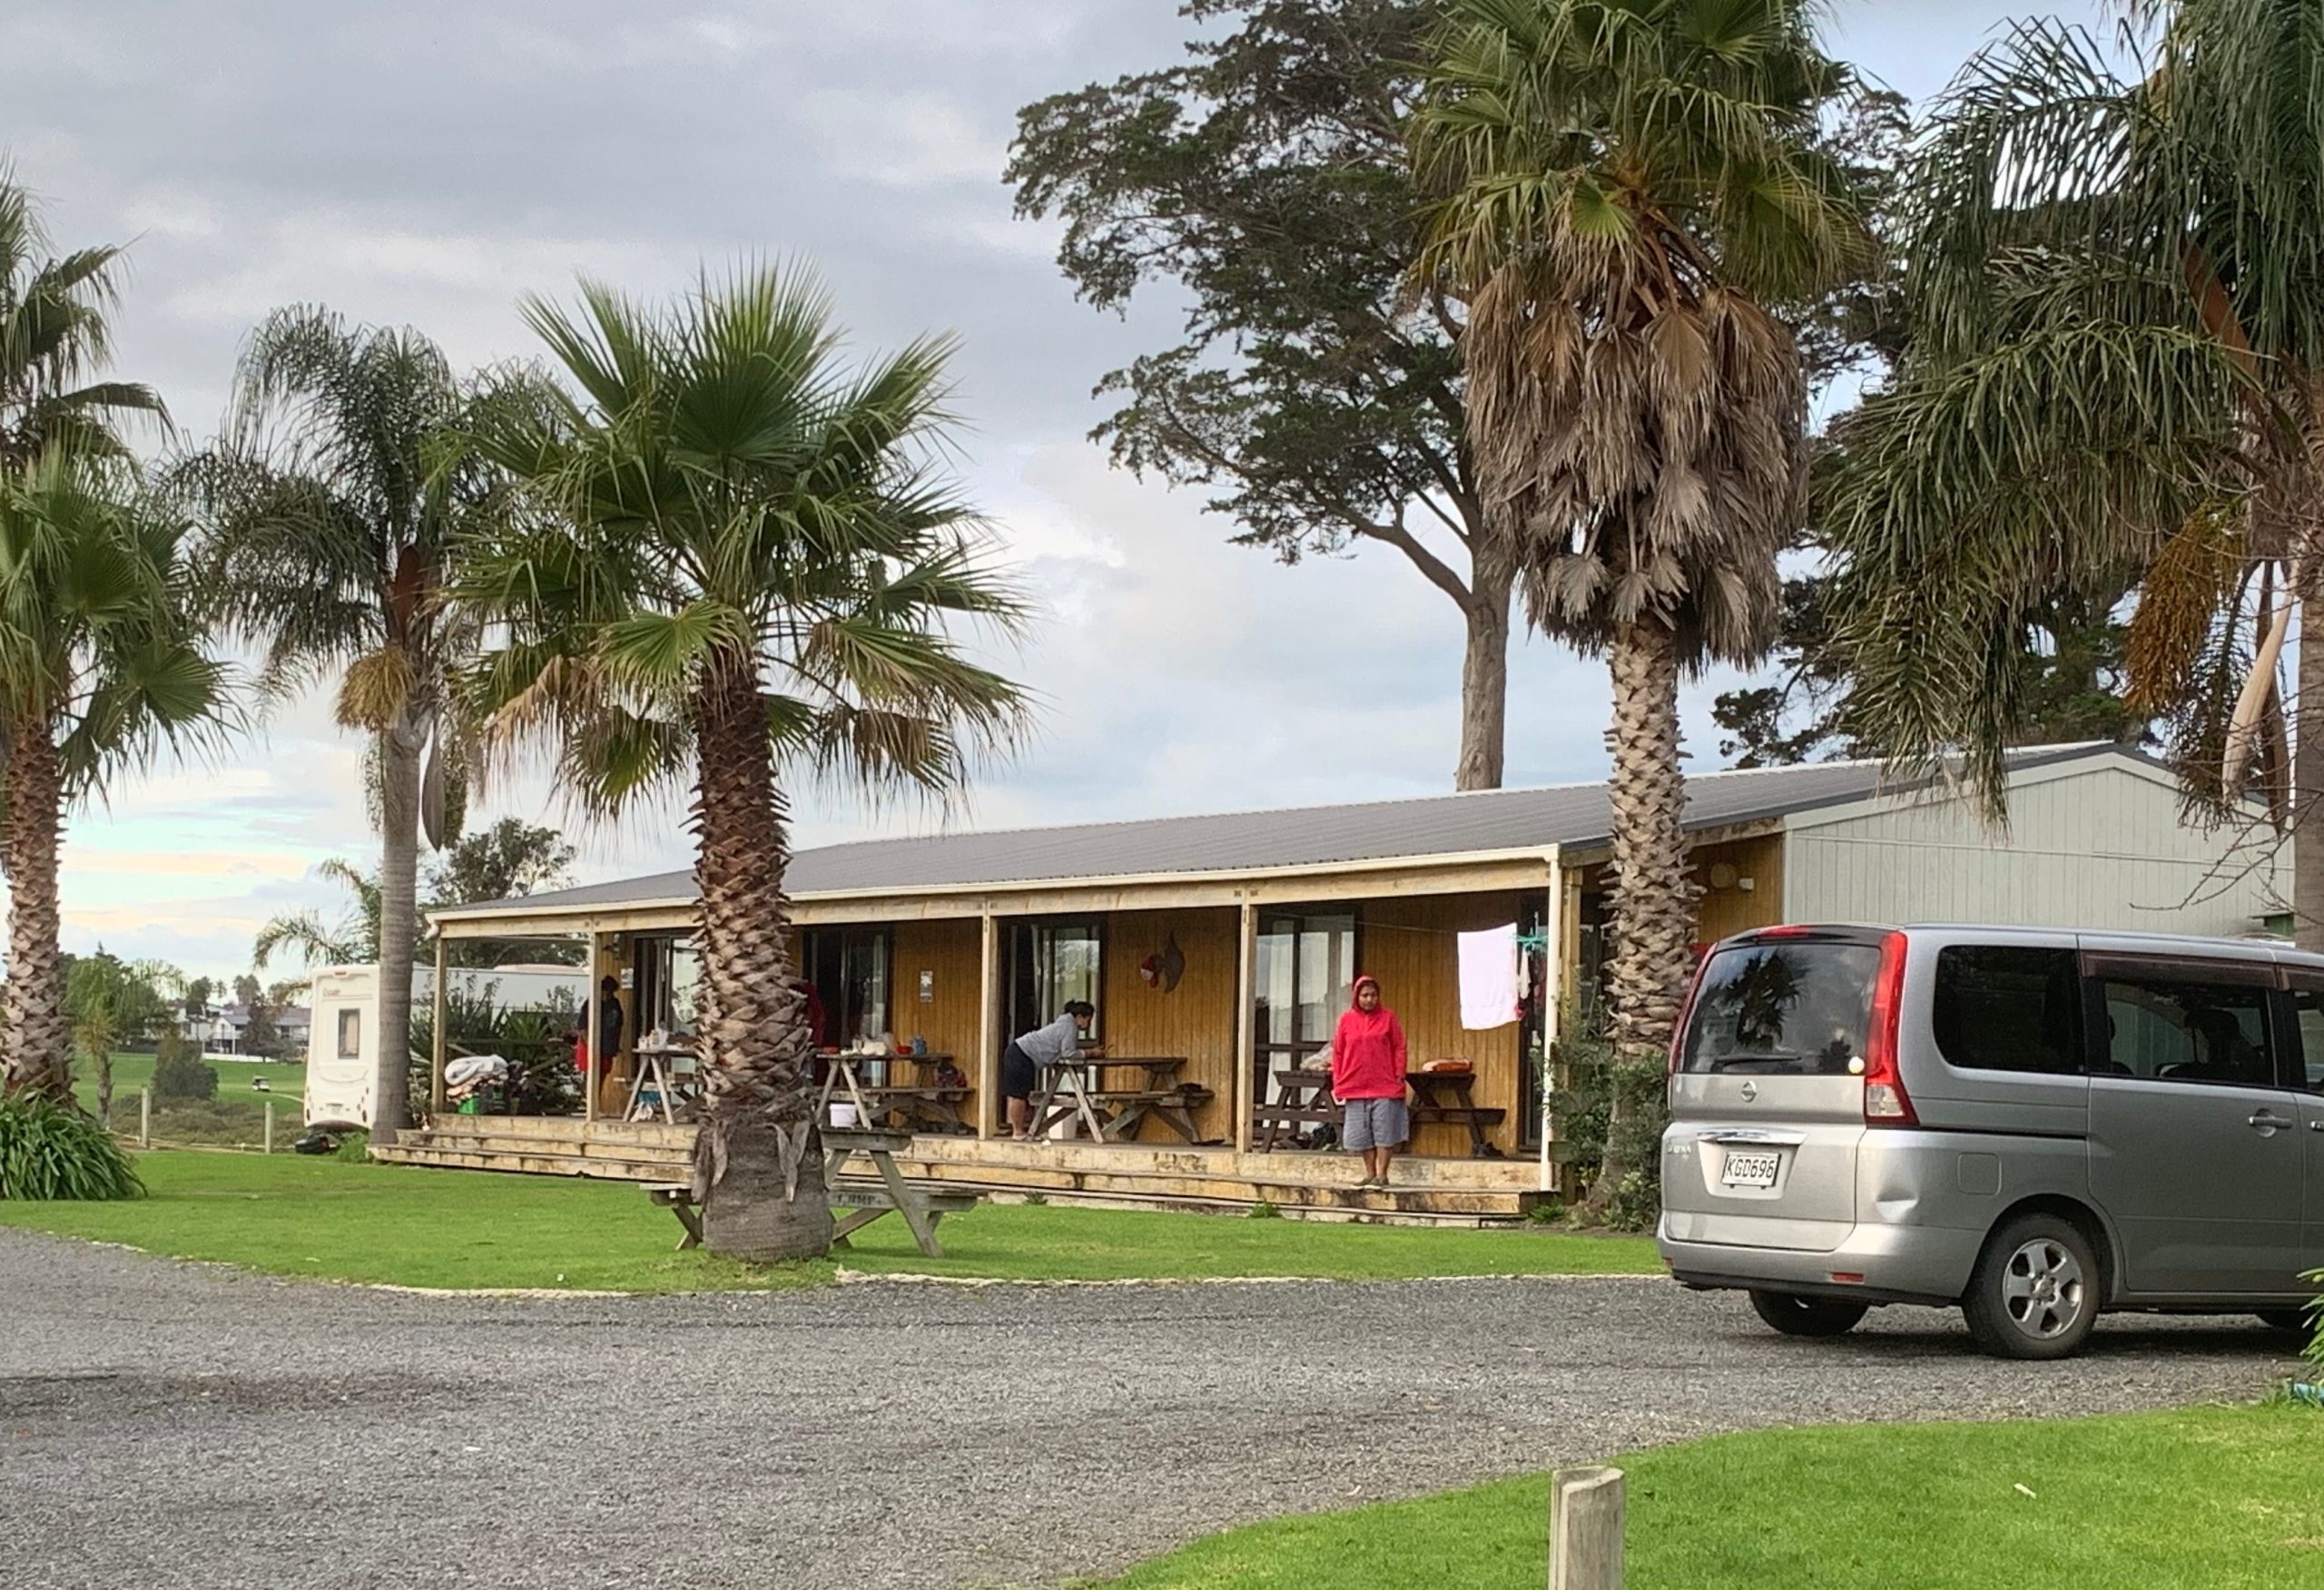 Photograph of a single story building with a verandah on which there are three people and some outdoor tables and benches. There are tall palm trees growing around the house and a small van parked in the driveway.